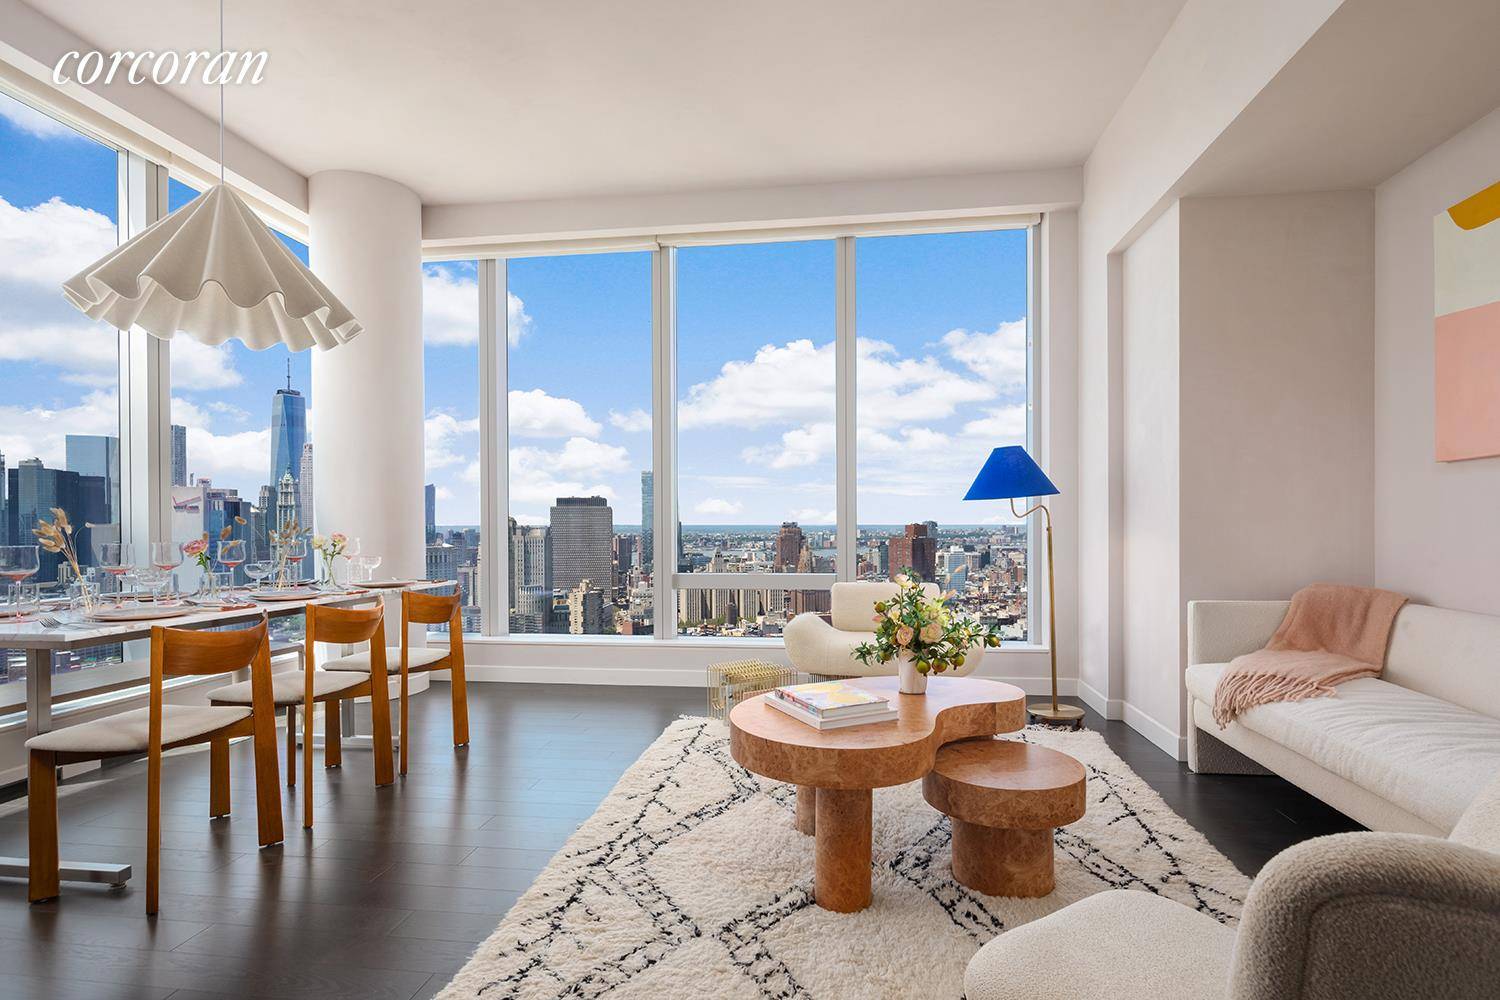 ONE MANHATTAN SQUARE OFFERS ONE OF THE LAST 20 YEAR TAX ABATEMENTS AVAILABLE IN NEW YORK CITY Residence 29A is a 1162 square foot two bedroom, two bathroom with an ...